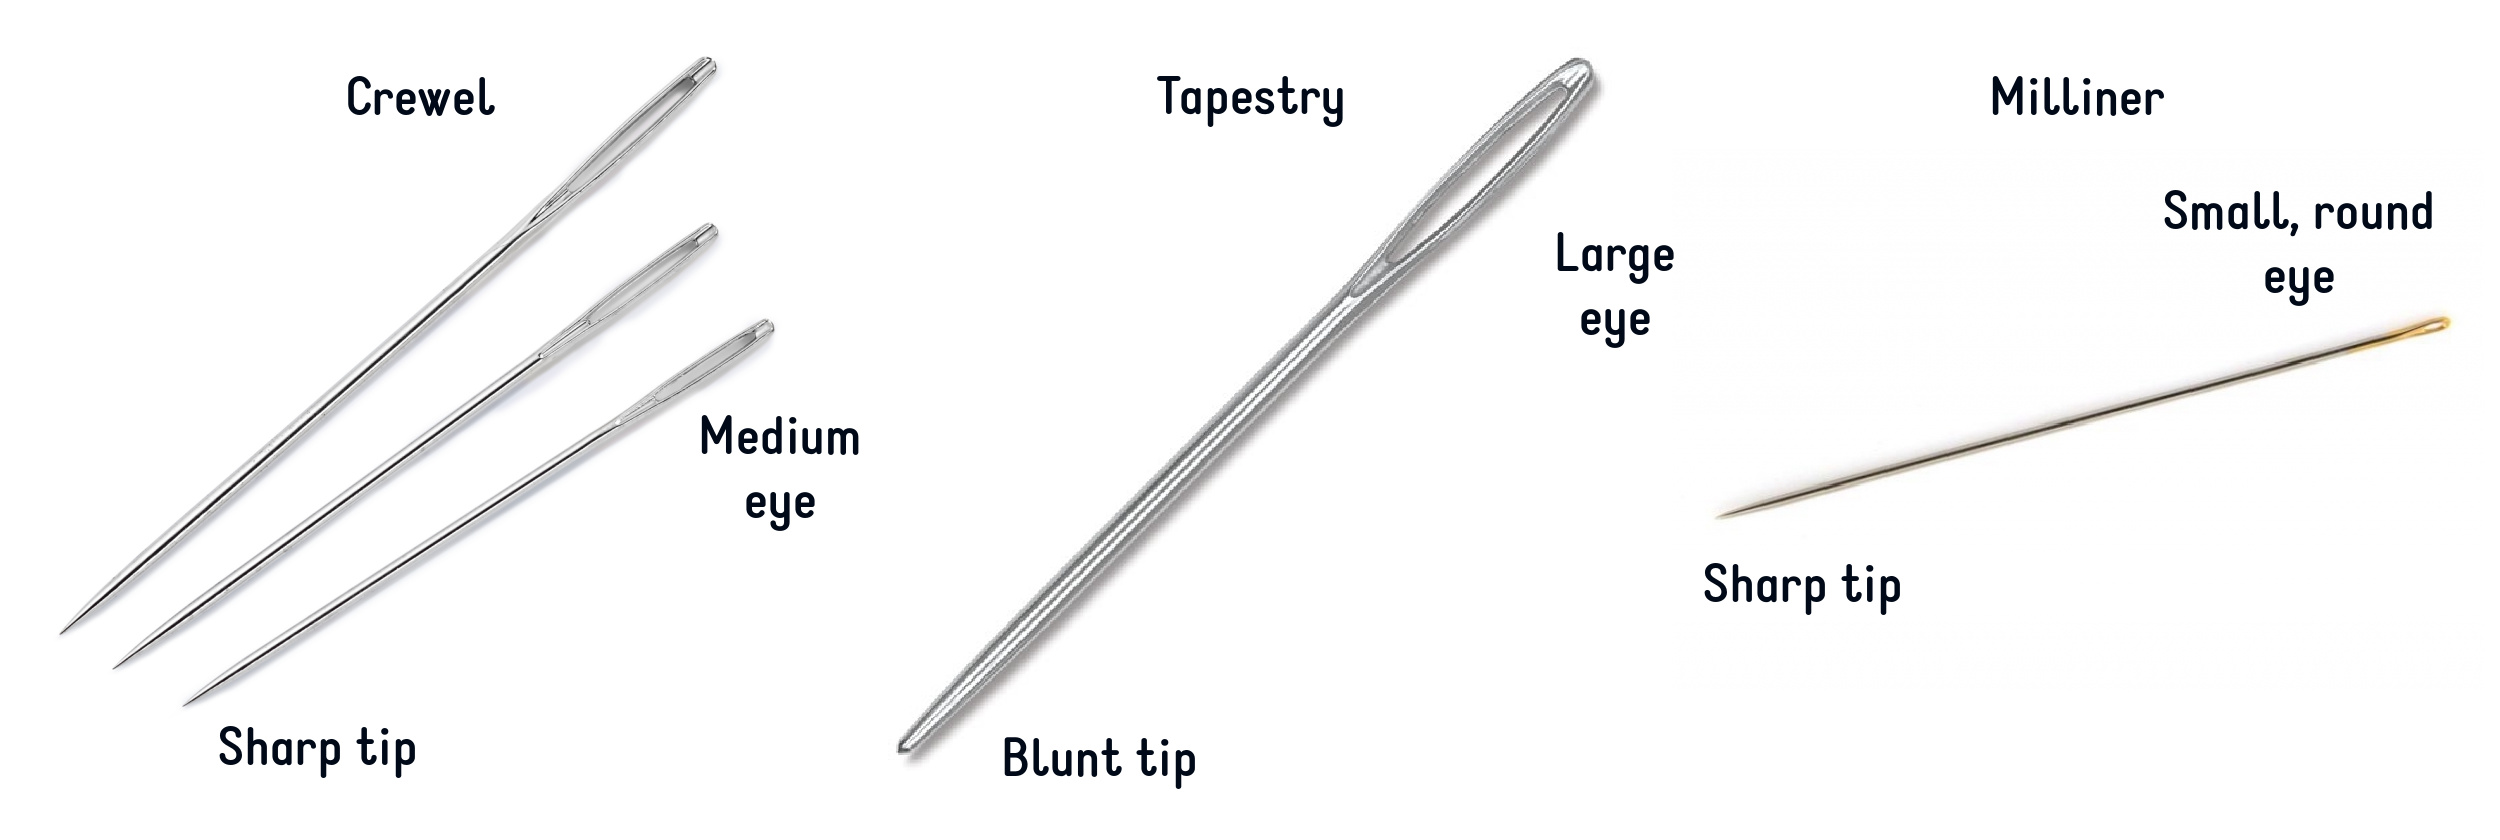 Types of embroidery needles